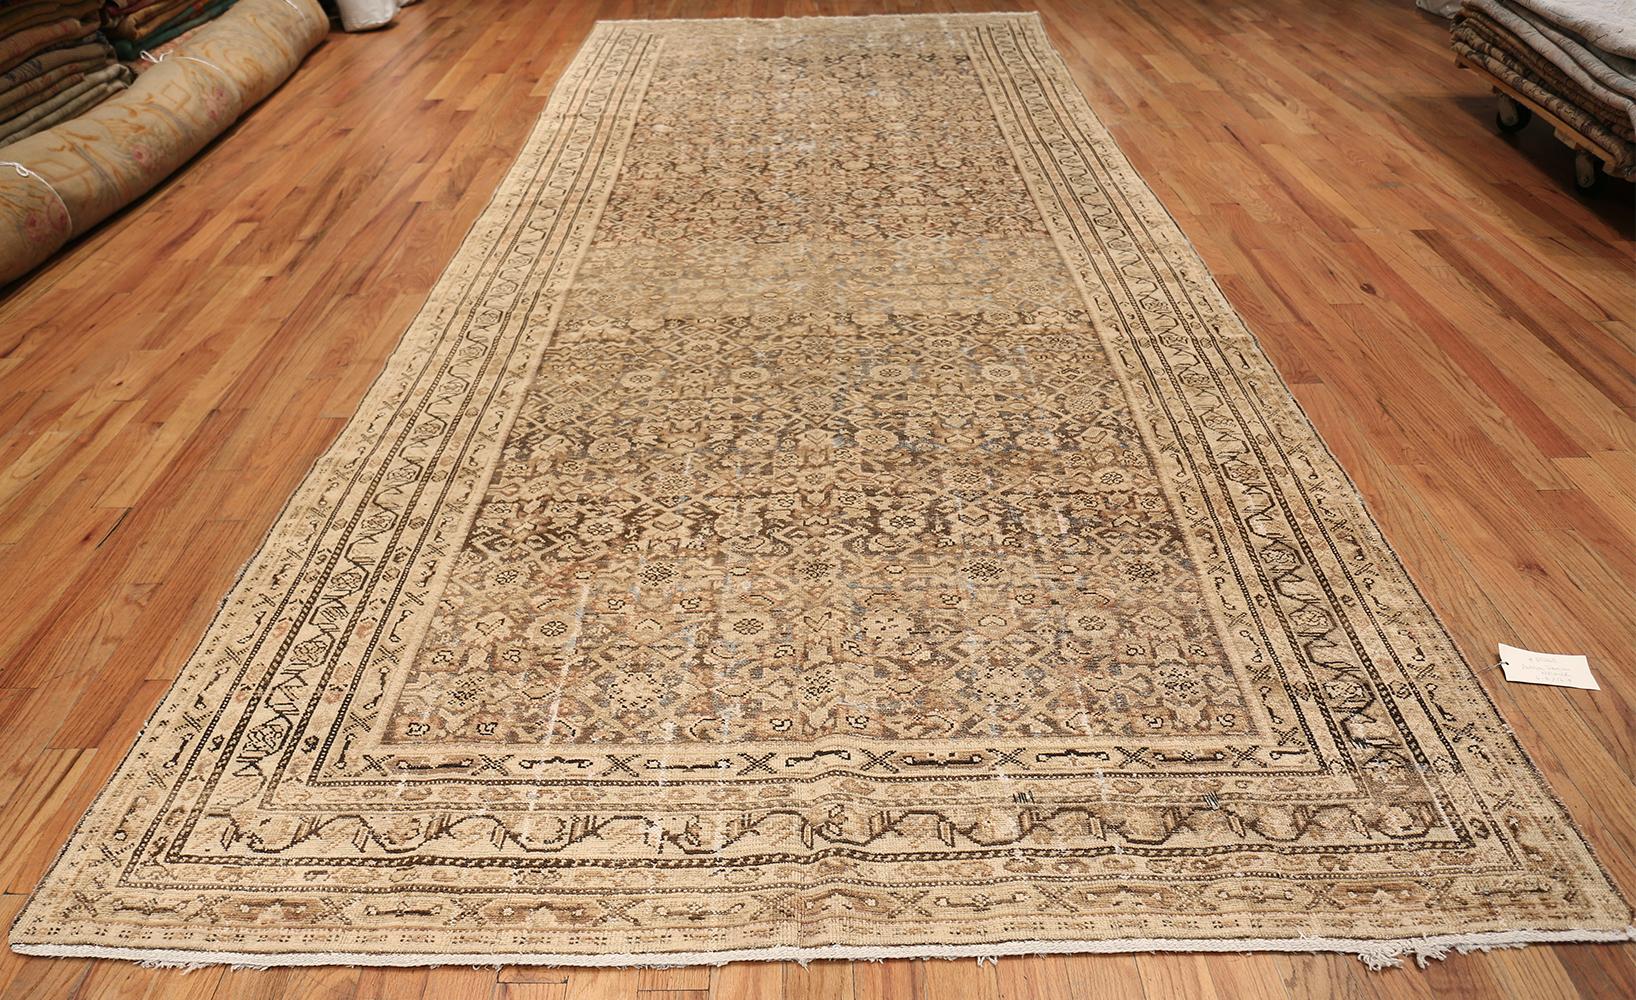 Antique Persian Shabby Chic Malayer Wide Hallway Gallery Rug, Country of Origin: Persia, Circa Date: Early 20th century (Around the 1910s) Size: 6 ft 8 in x 16 ft 4 in (2.03 m x 4.98 m)

This shabby chic rug, a beautiful antique Persian Malayer wide